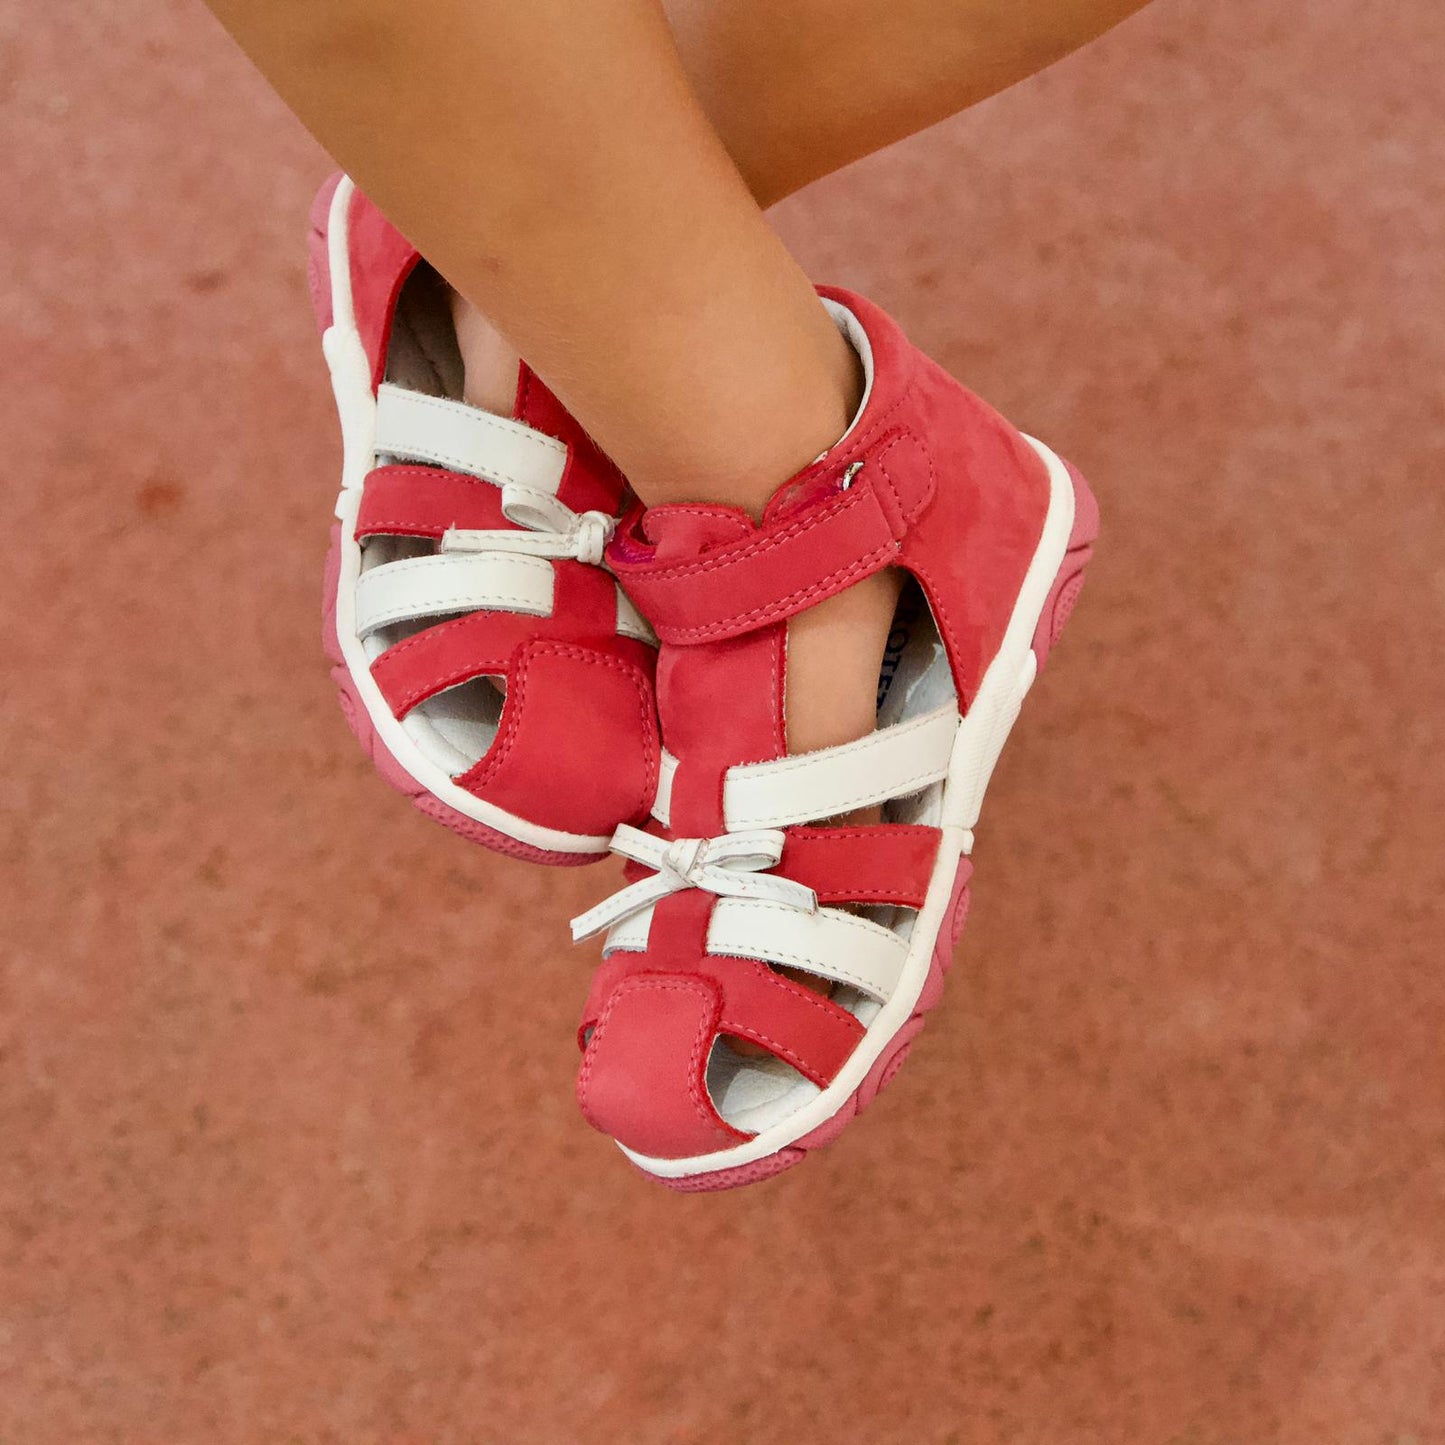 Girly red and white sandals for toddler girls, which match every outfit. Suede leather, arch support and a supportive heel counter.